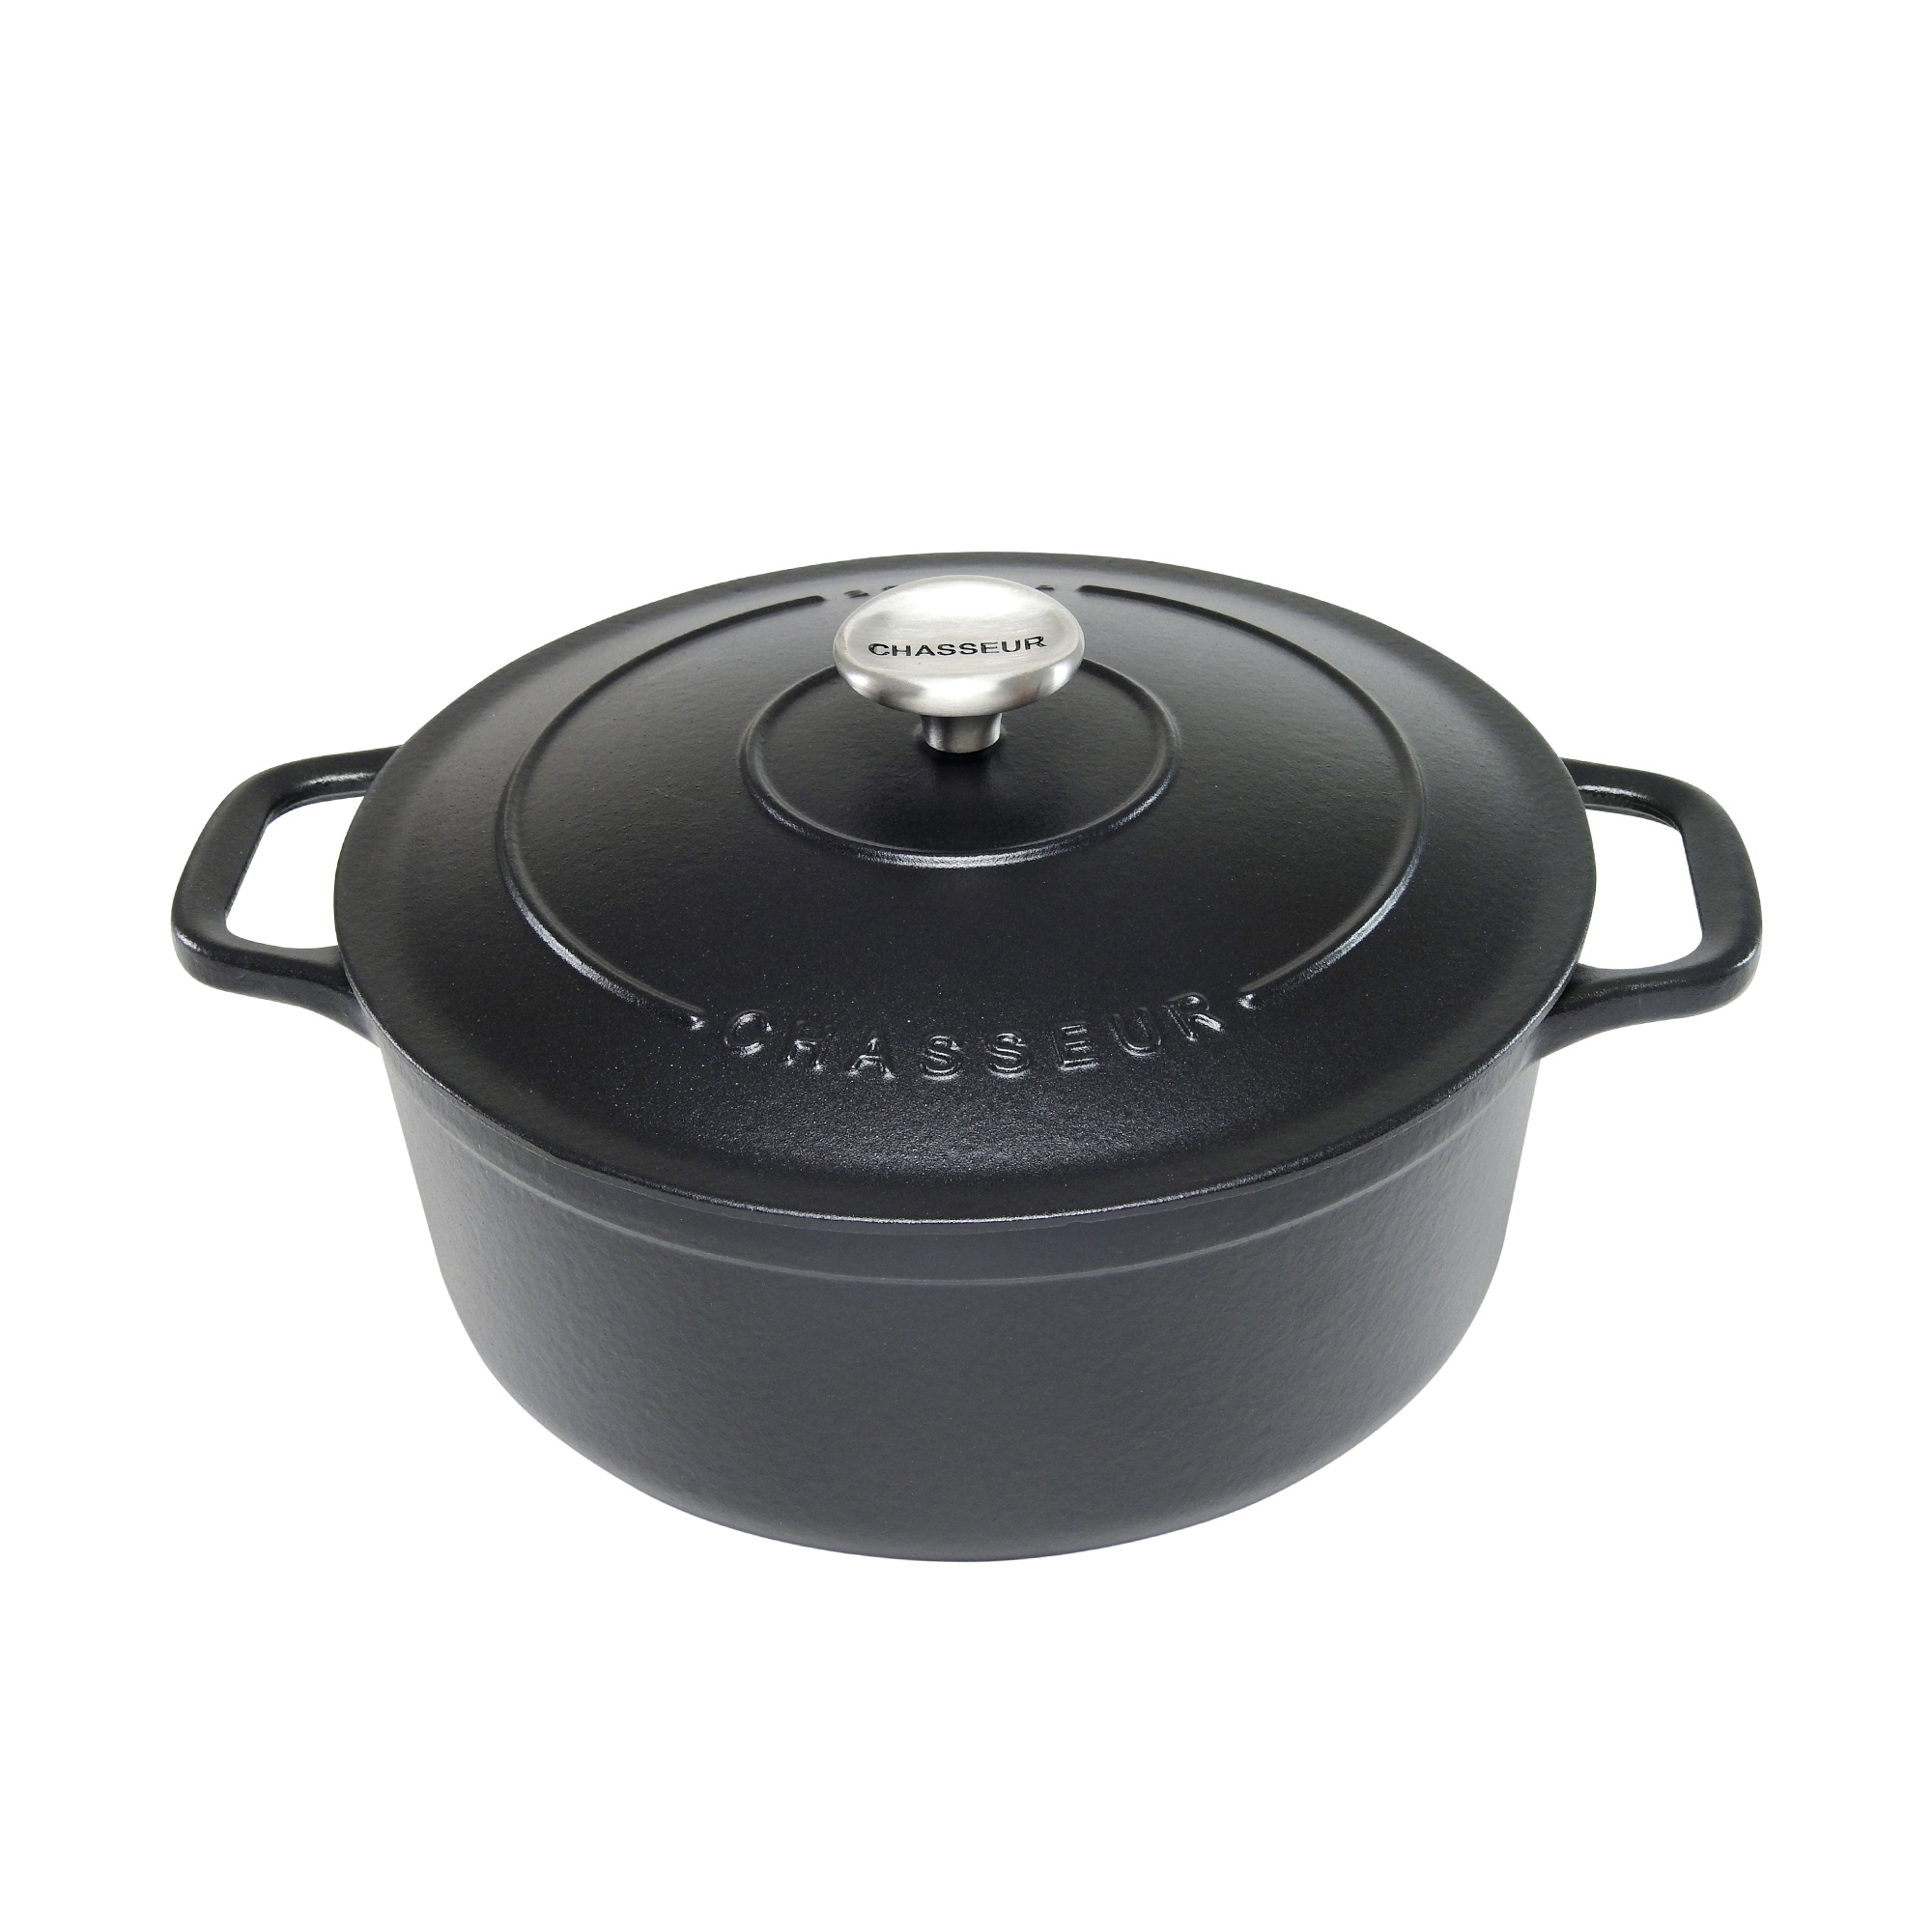 Chasseur Round French Oven 28cm - 6.1L Matte Black Image 1